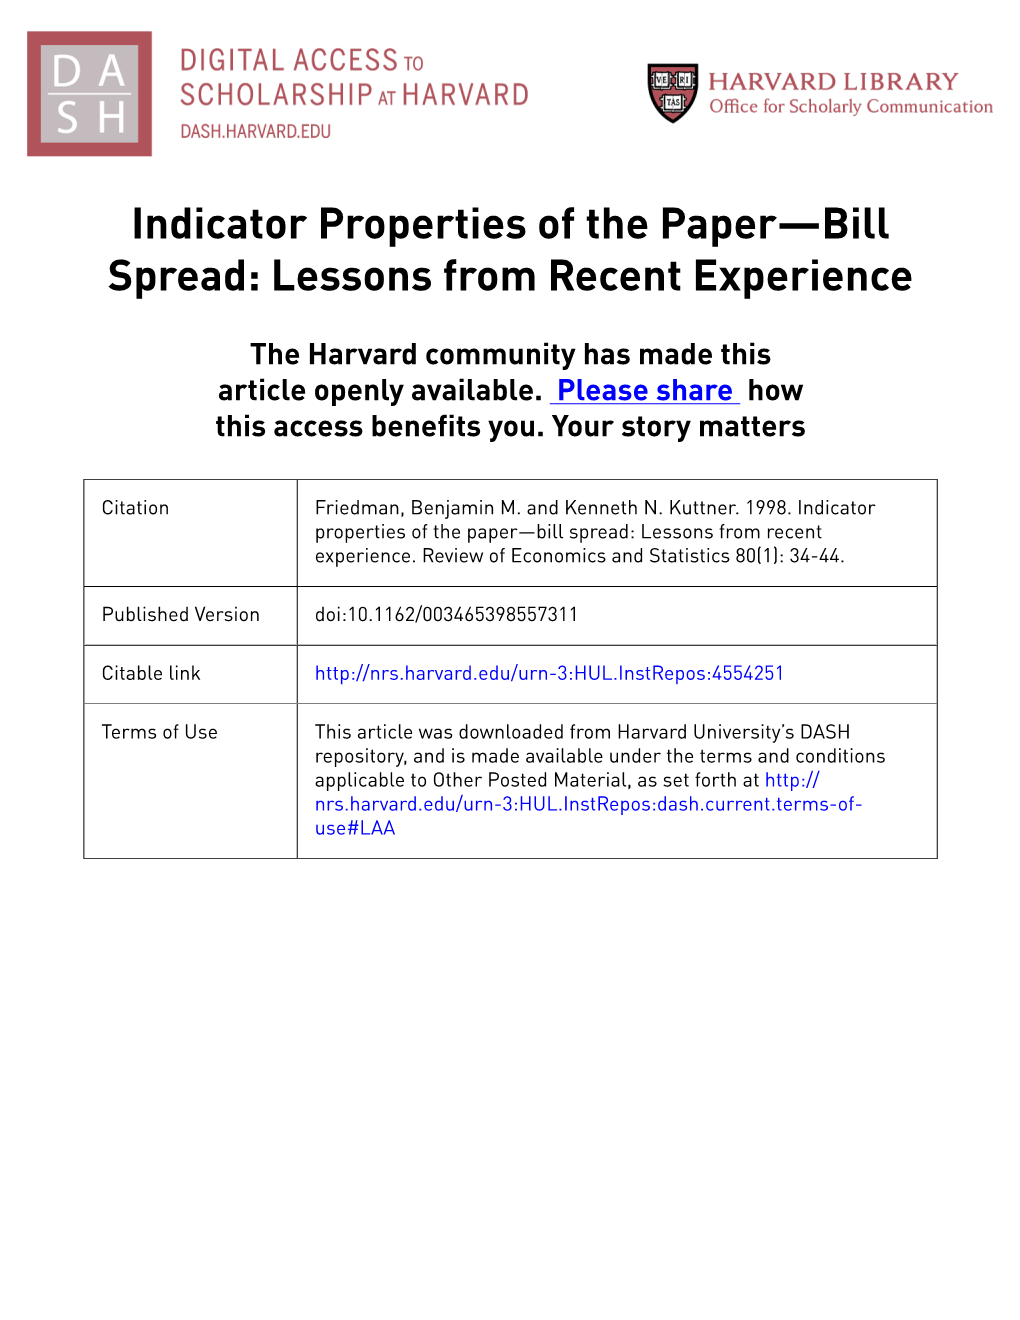 Indicator Properties of the Paper—Bill Spread: Lessons from Recent Experience